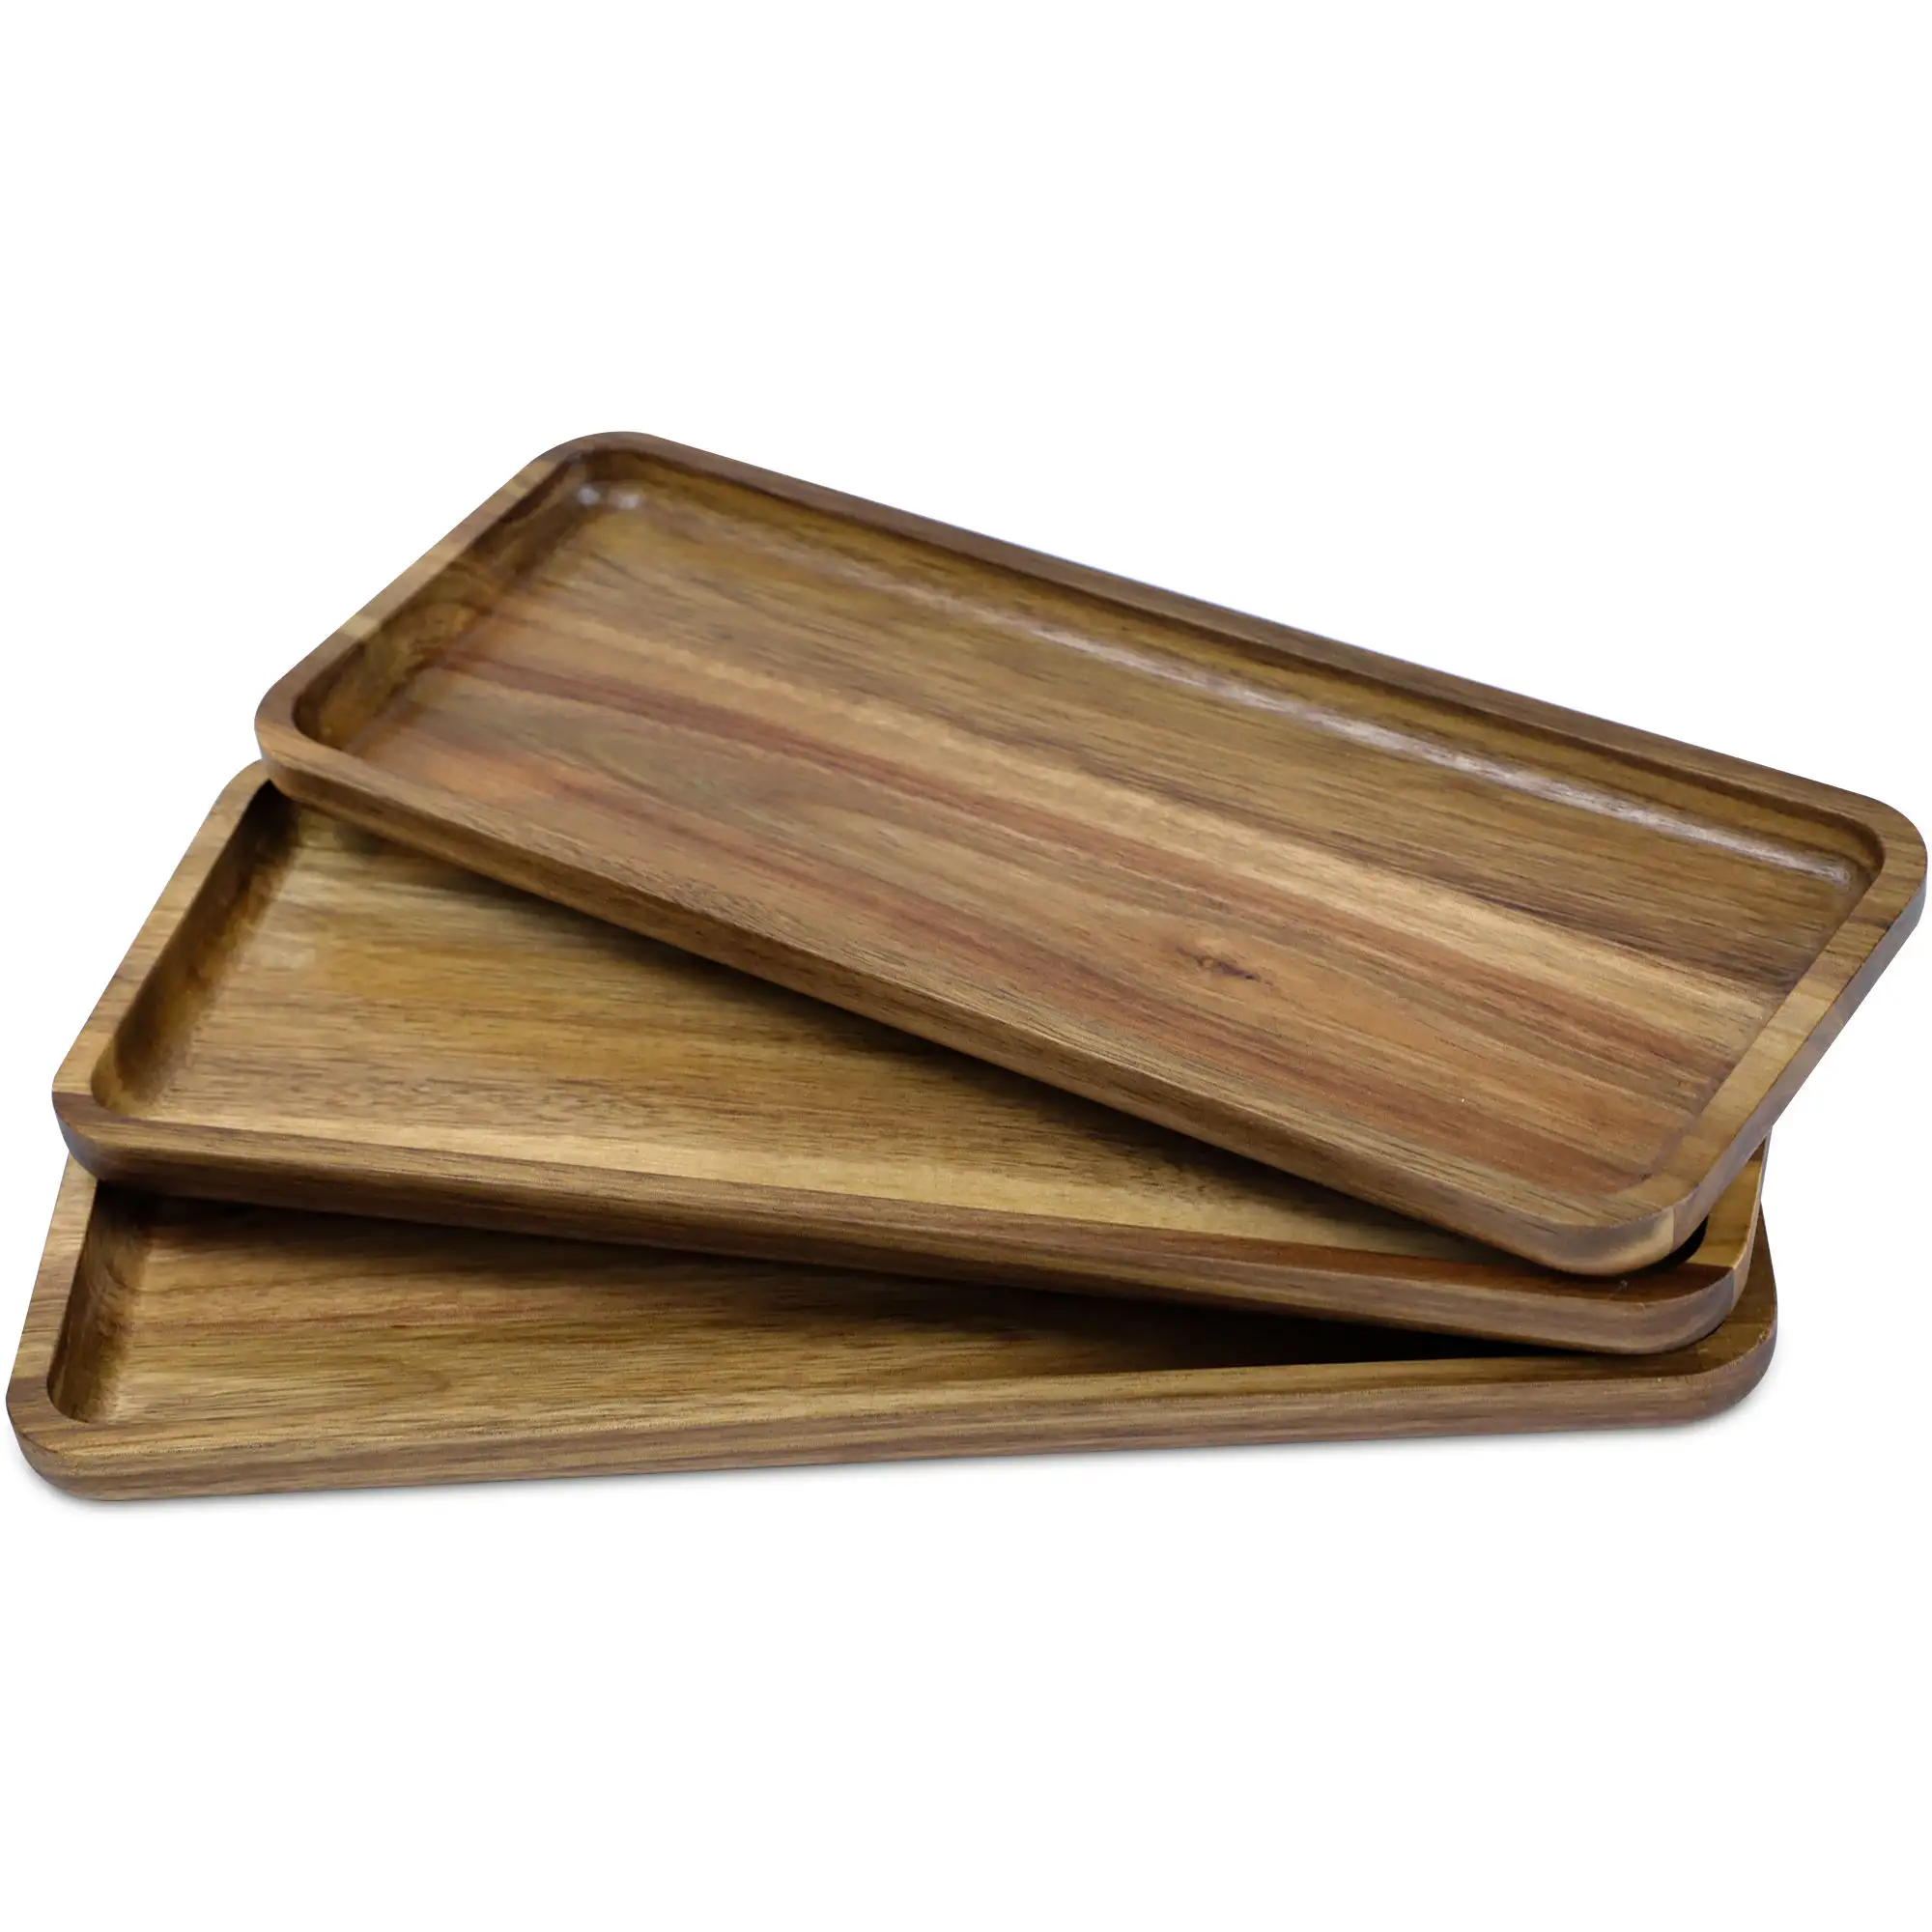 View larger image Add to Compare Share Wooden Serving Tray Vegetable Fruit Platter Decor Wood Trays Dessert Plates Food Dish S